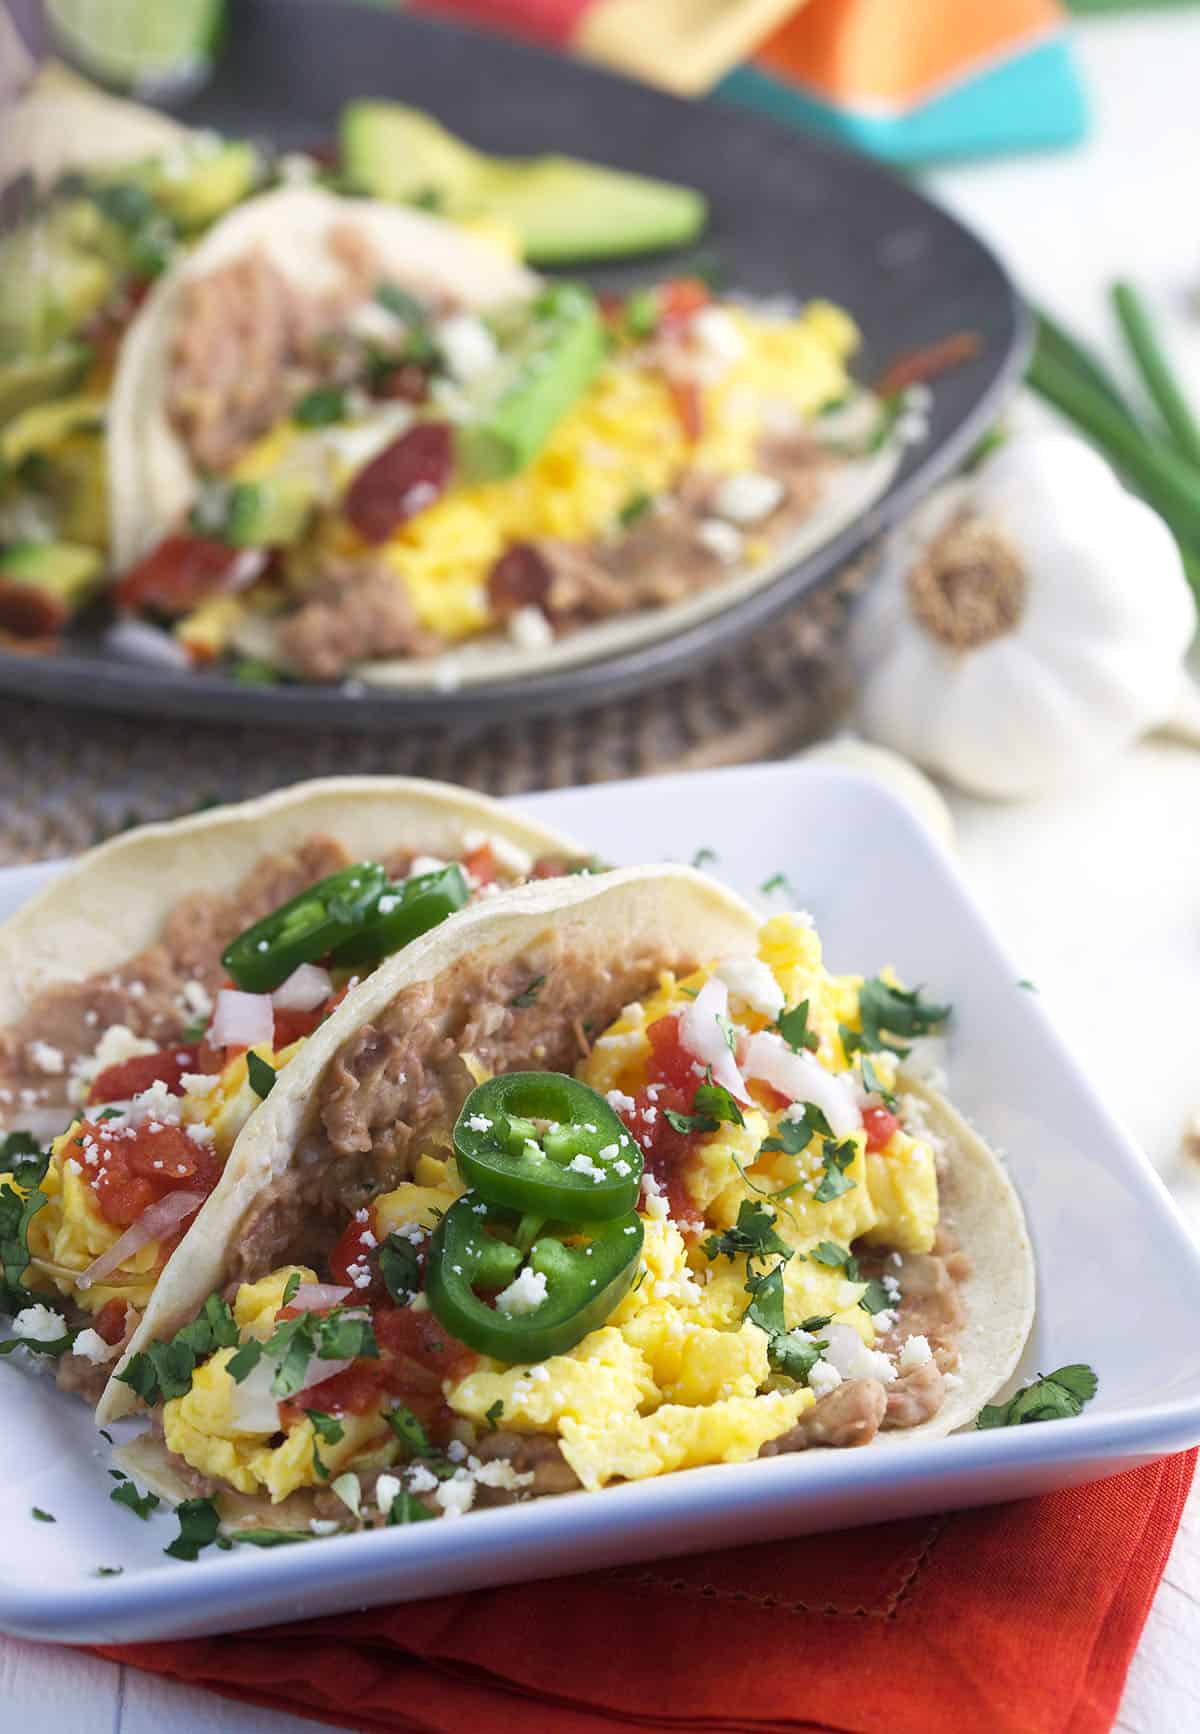 Several toppings are placed on top of a breakfast taco.